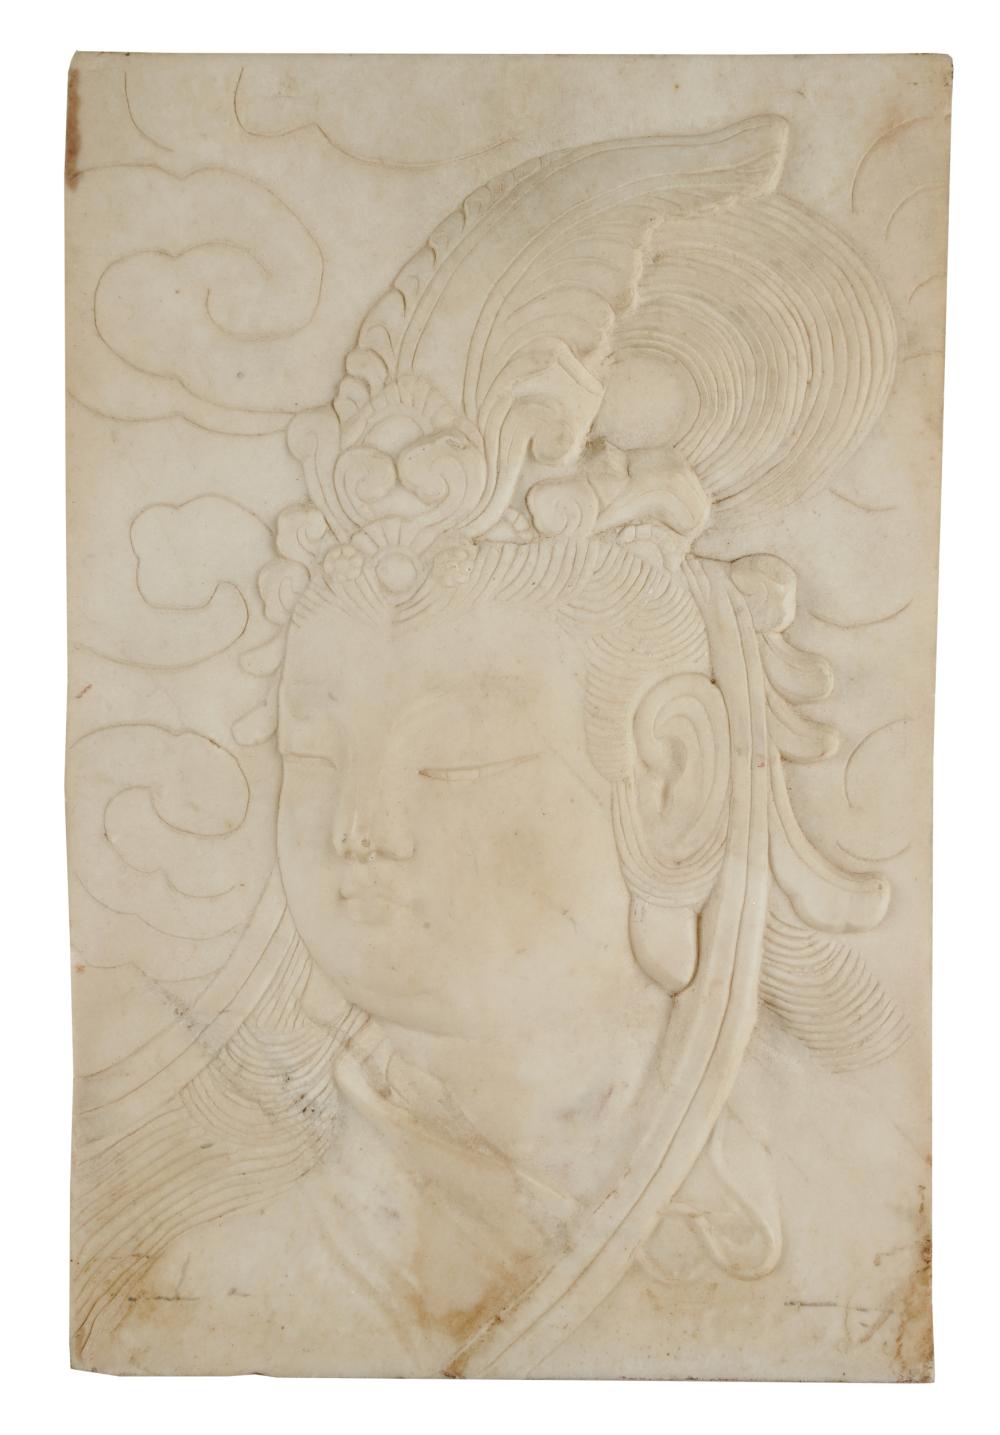 CHINESE CARVED MARBLE PLAQUEdepicting 334d6f